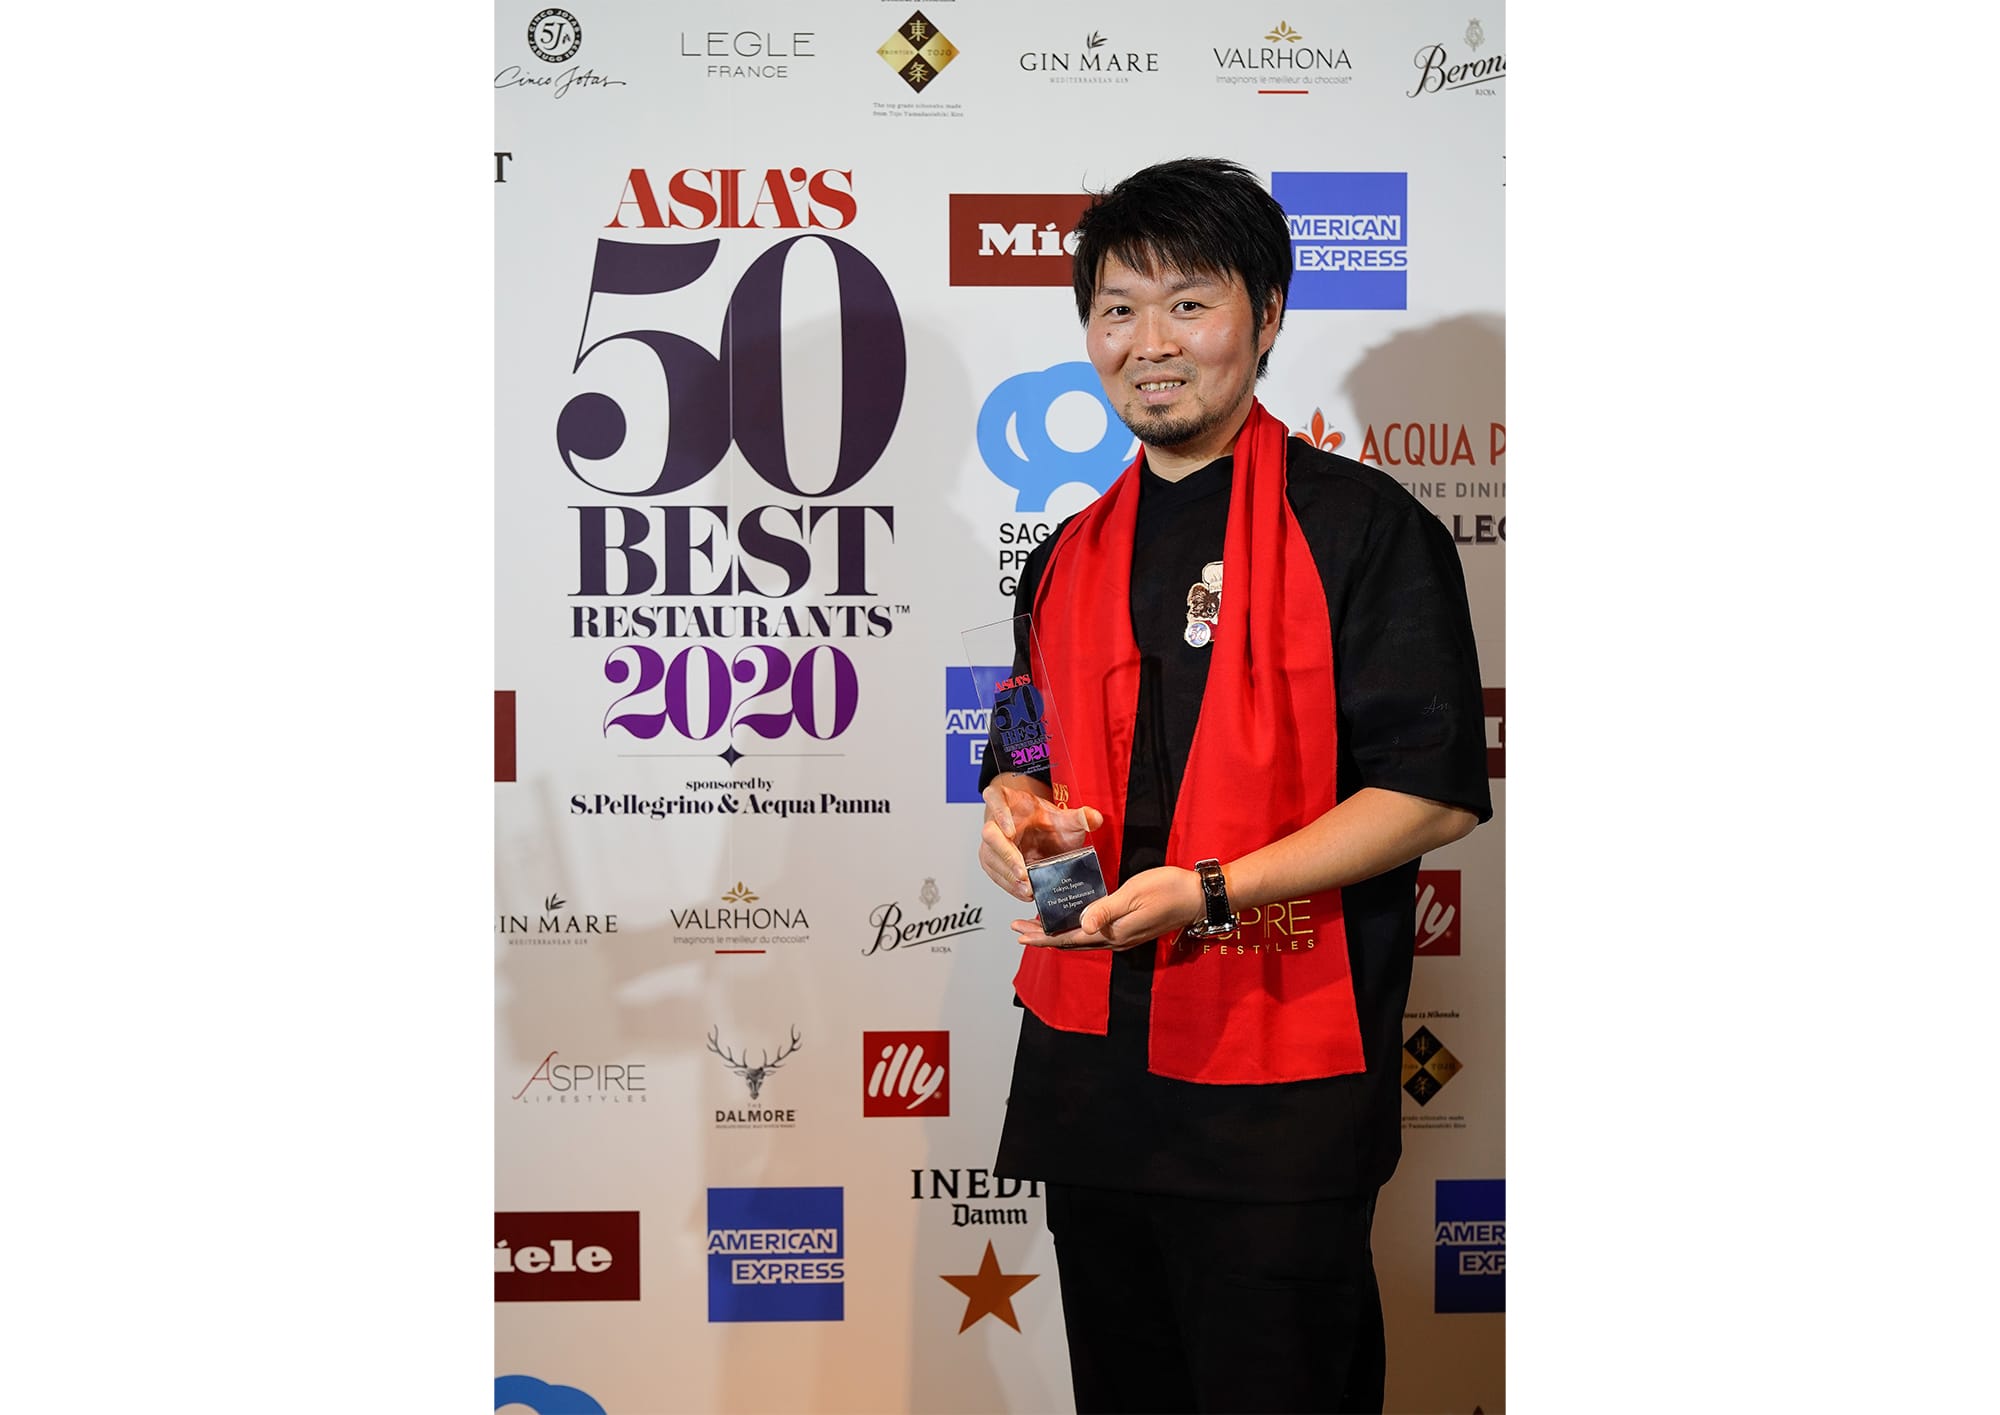 Zaiyu Hasegawa, the head chef of Den was awarded the title of Japan’s Best Restaurant for three years in a row. On the stage, before addressing any words of joy, Hasegawa said, “I pray that the chefs around the world will be in a better situation as soon as possible”.